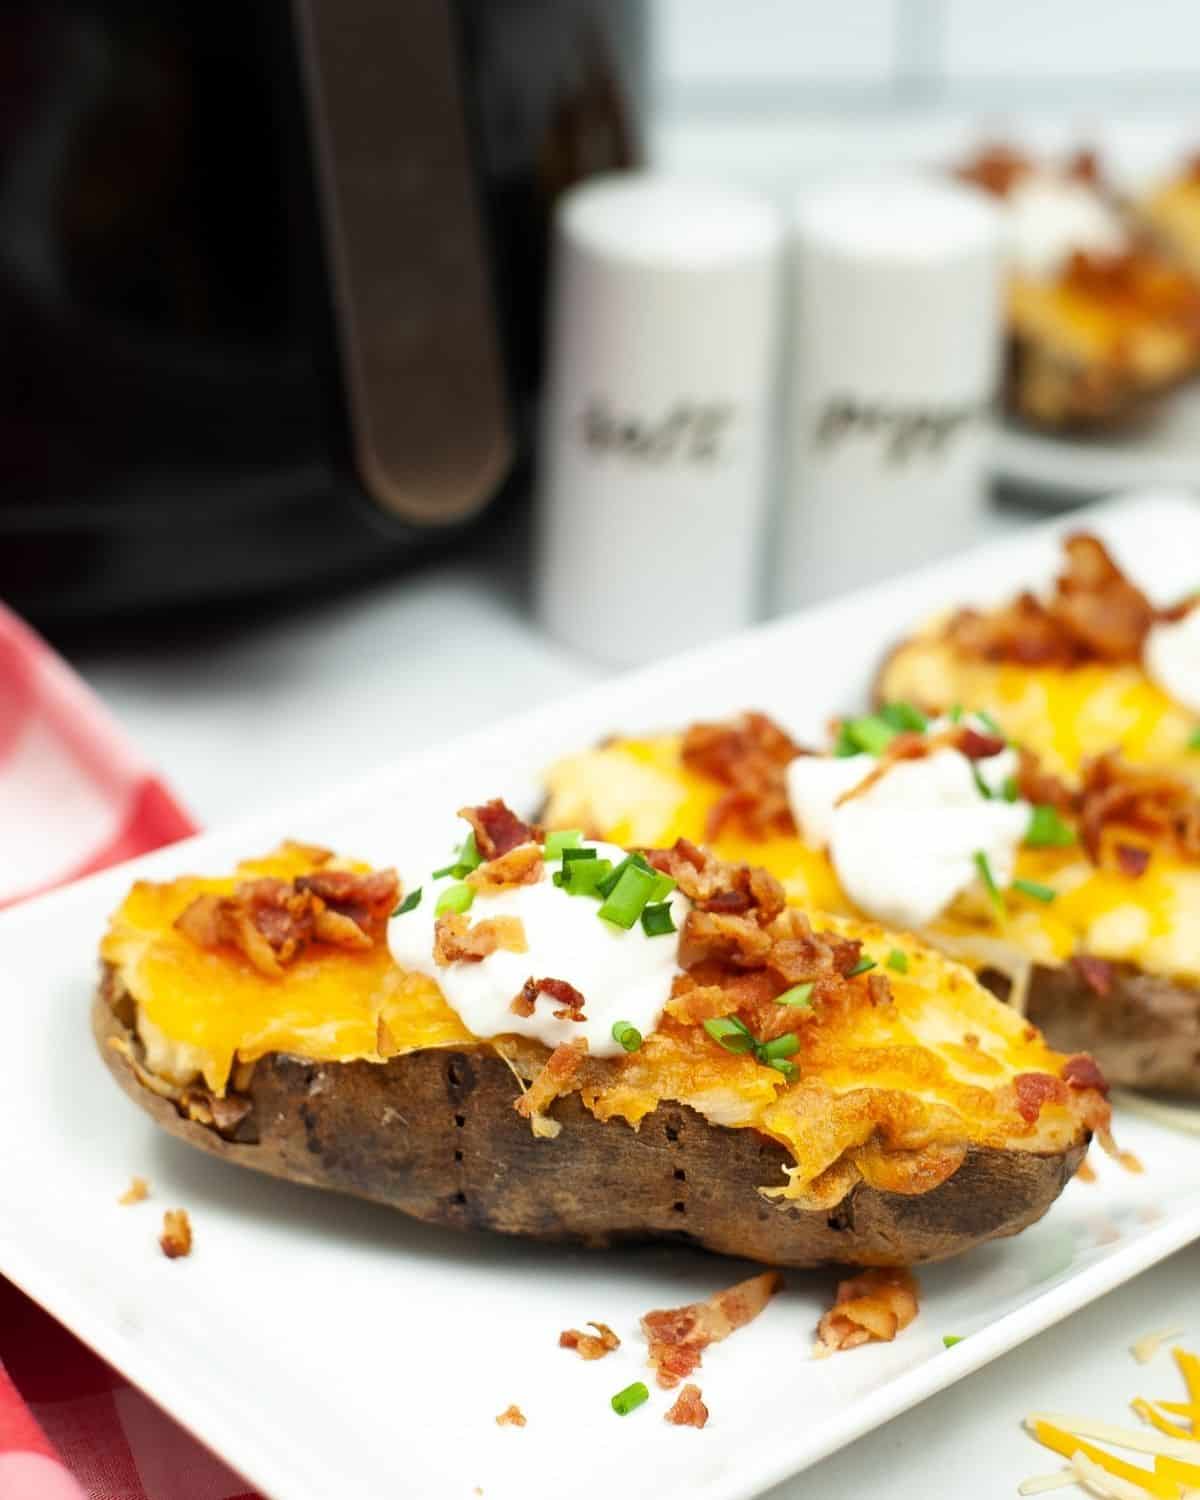 Baked potatoes topped with melted cheddar cheese and crumbled bacon on a plate.